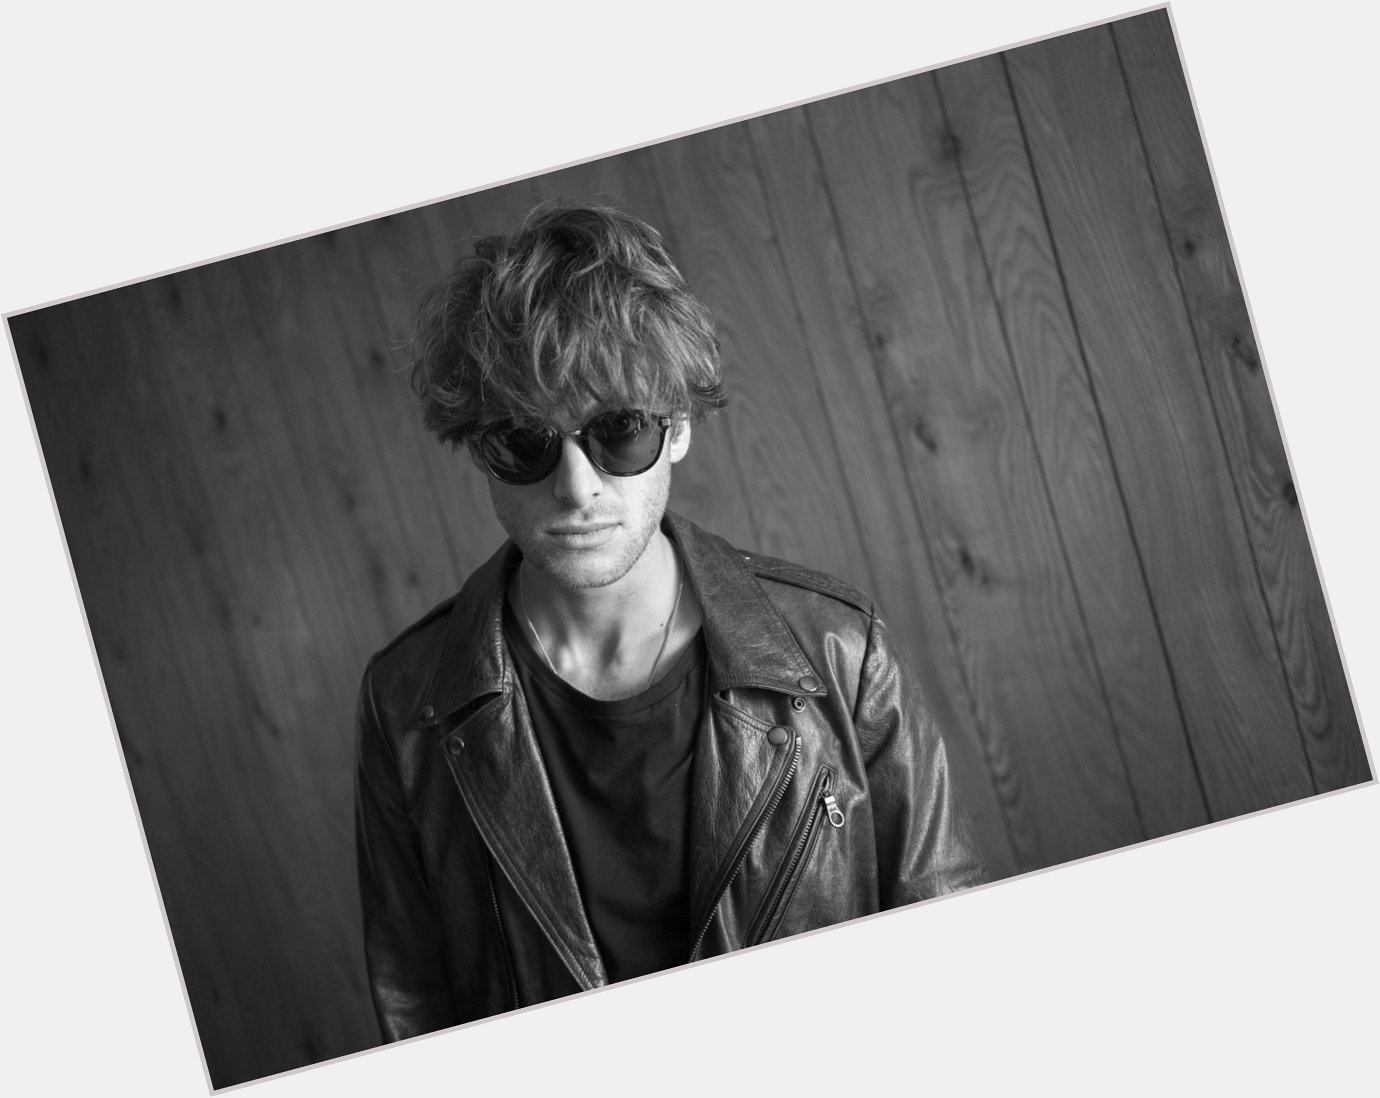 \" Happy Birthday to the man with the incredible voice: Paolo Nutini  Happy Birthday !!!